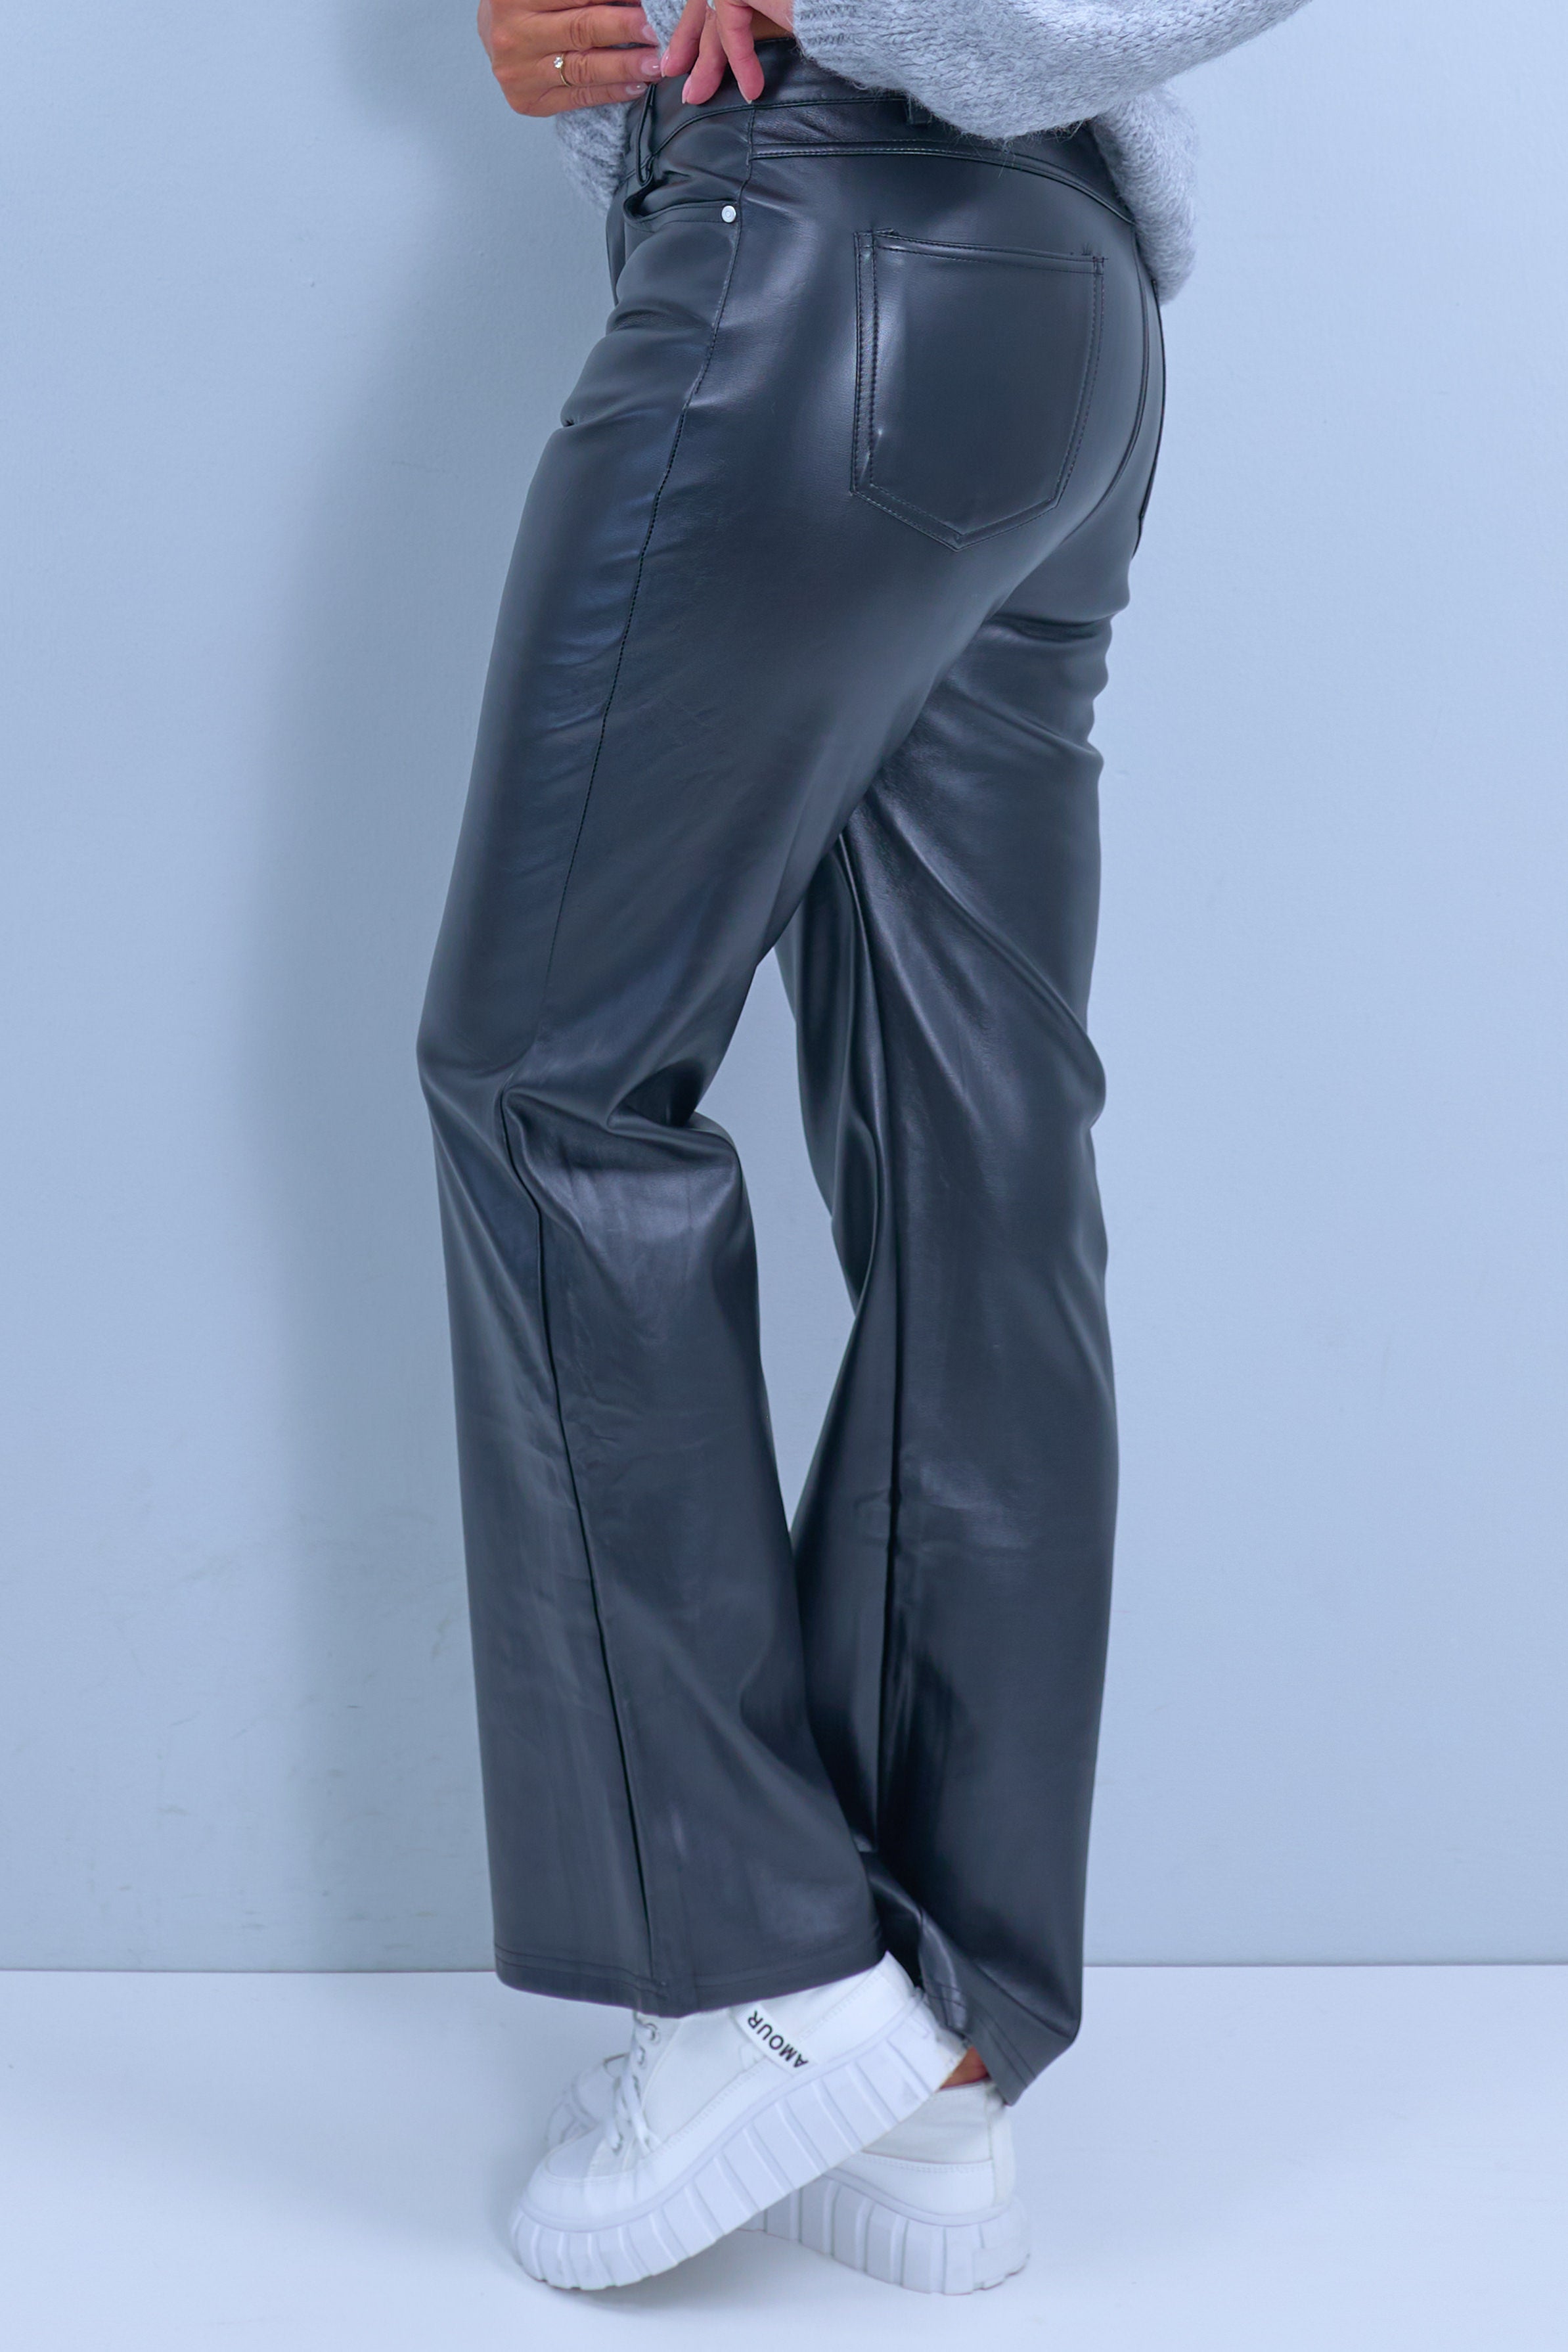 Faux leather pants in 5-pocket style, black